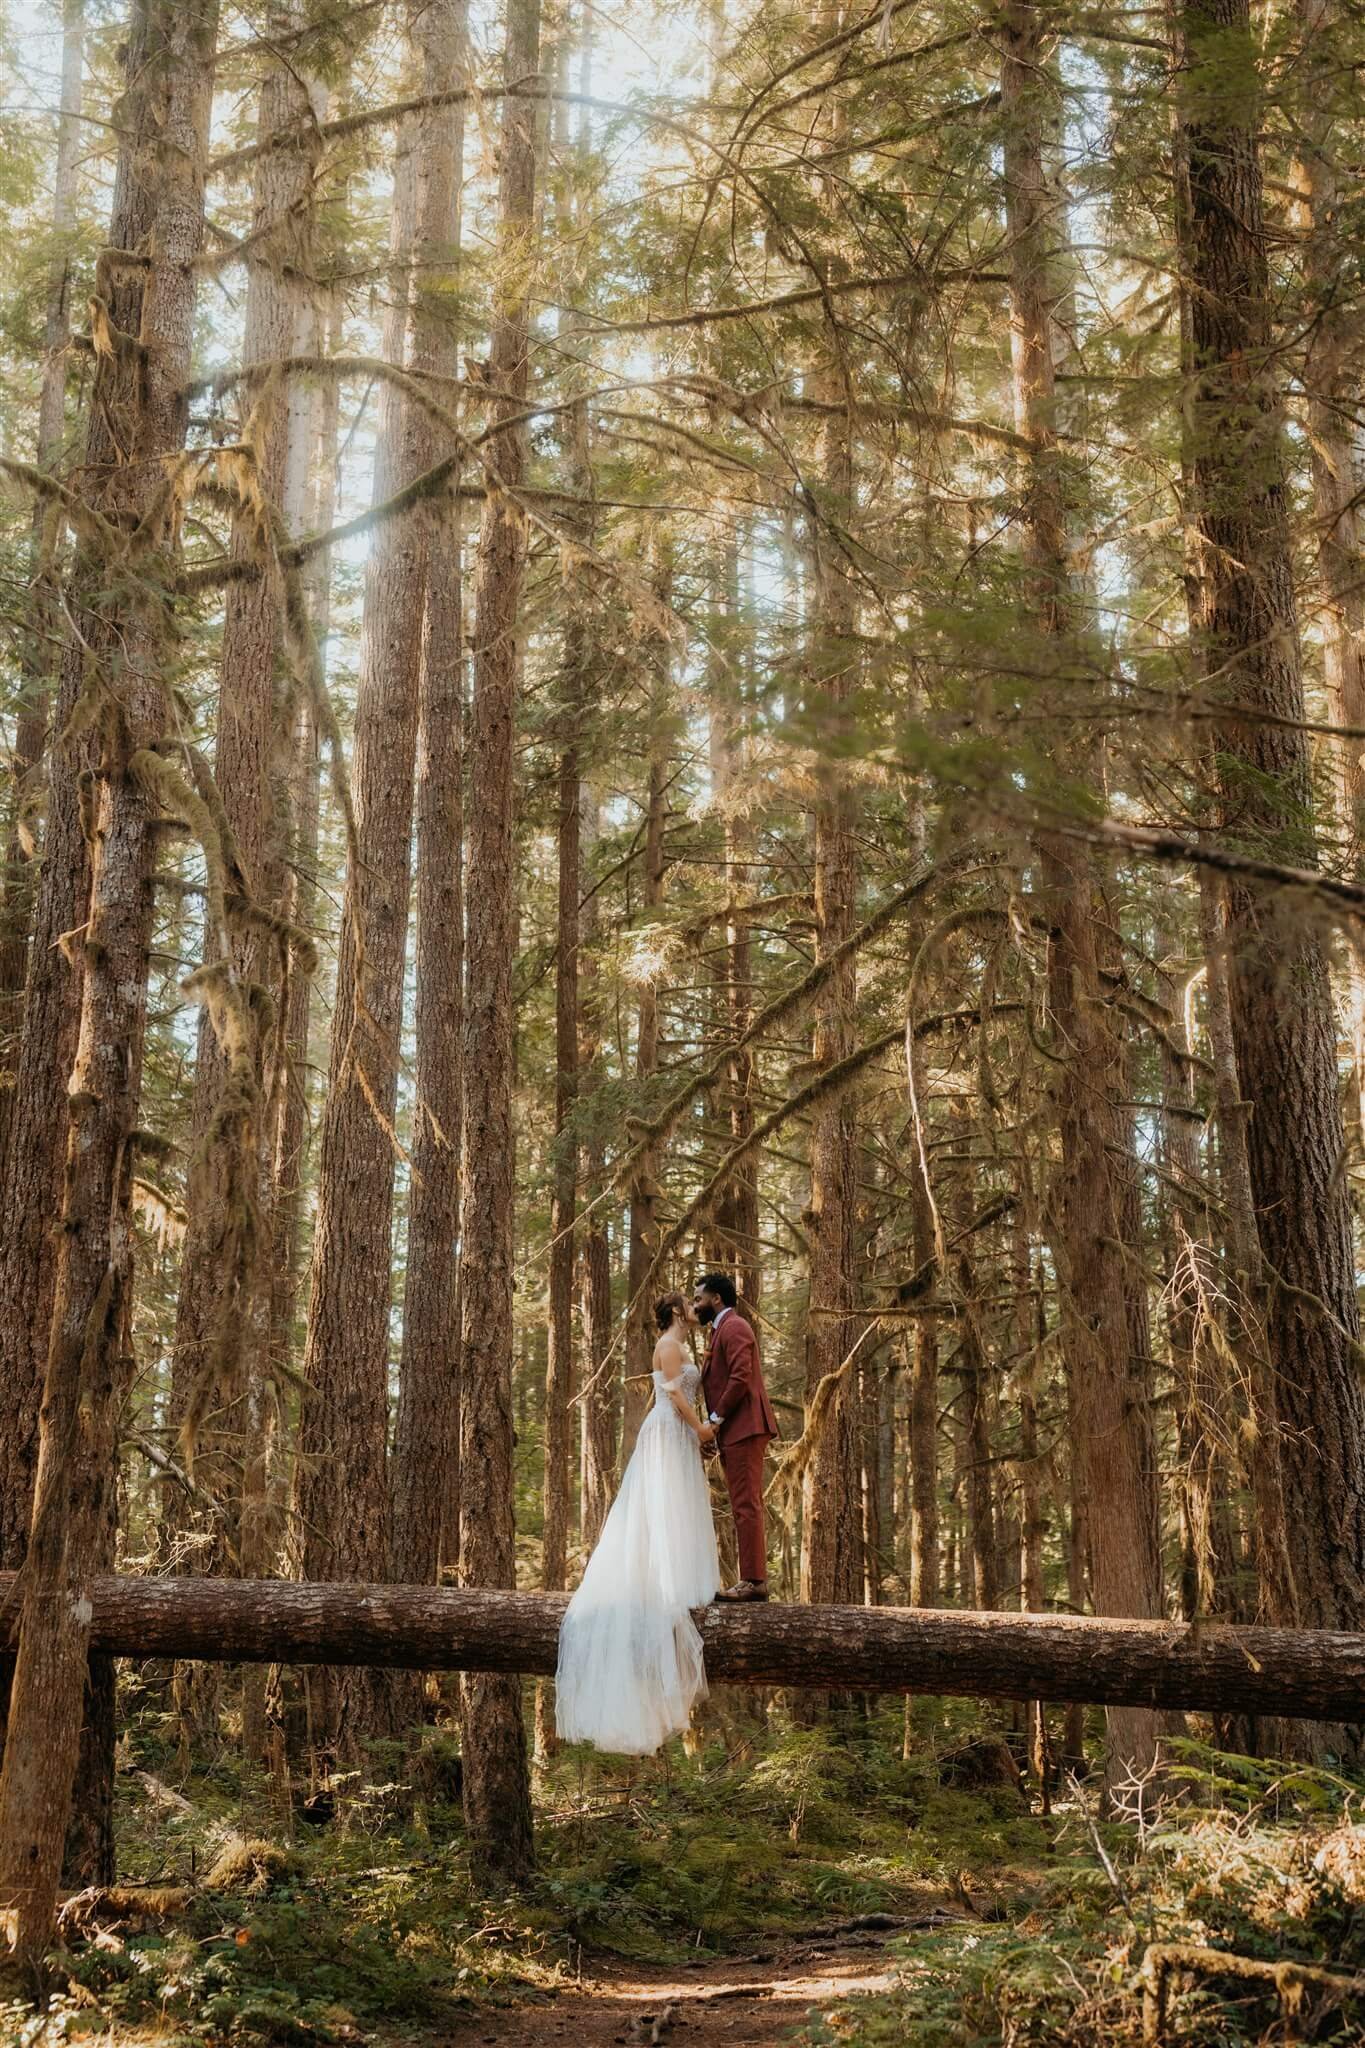 Bride and groom portrait photos in the woods at North Cascades National Park